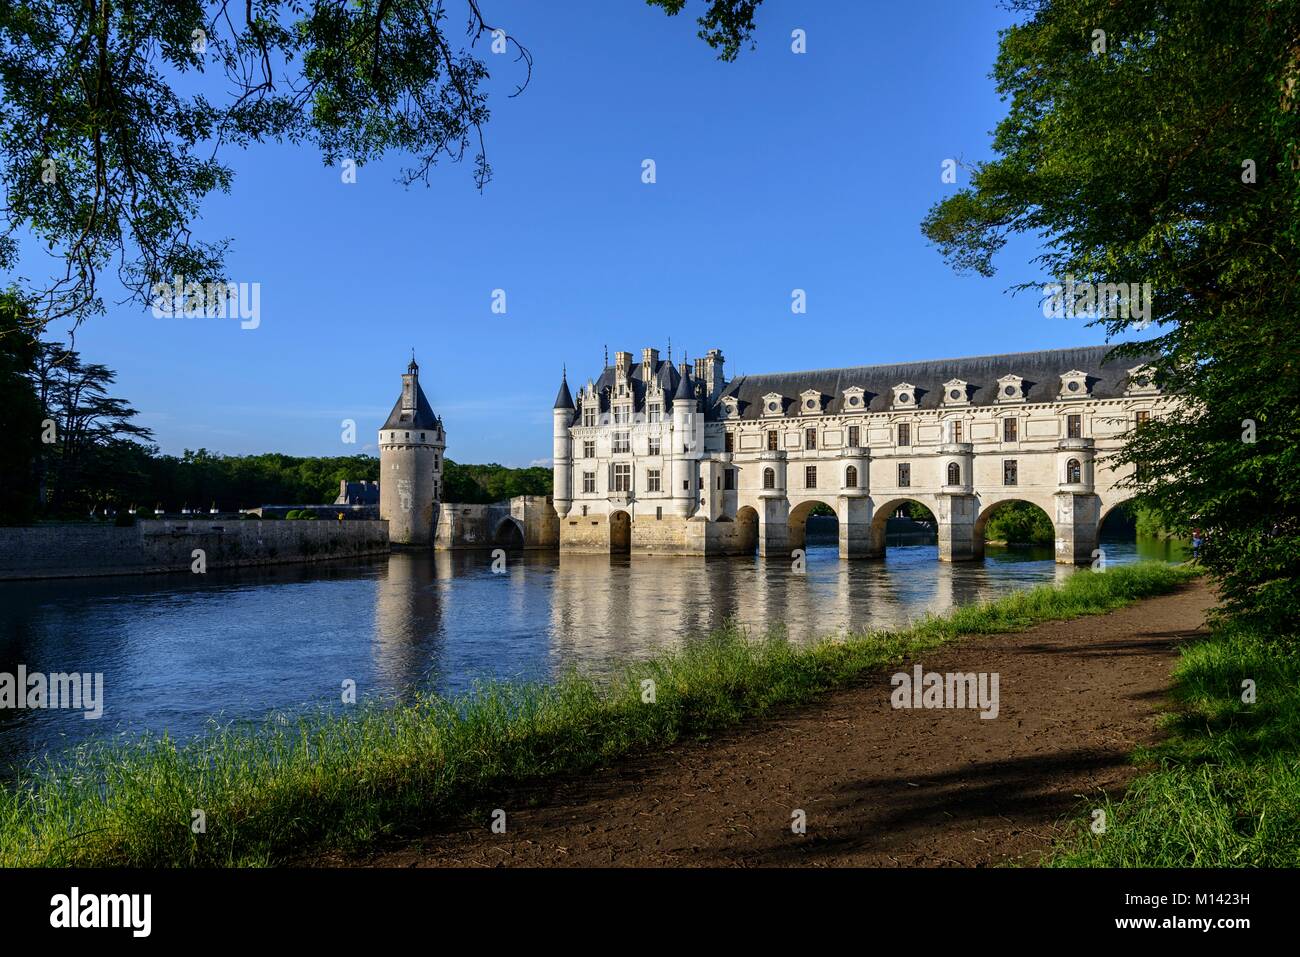 France, Indre et Loire, Loire Valley, castle of Chenonceau listed as World Heritage by UNESCO, built between 1513 - 1521 in Renaissance style, over the Cher river Stock Photo